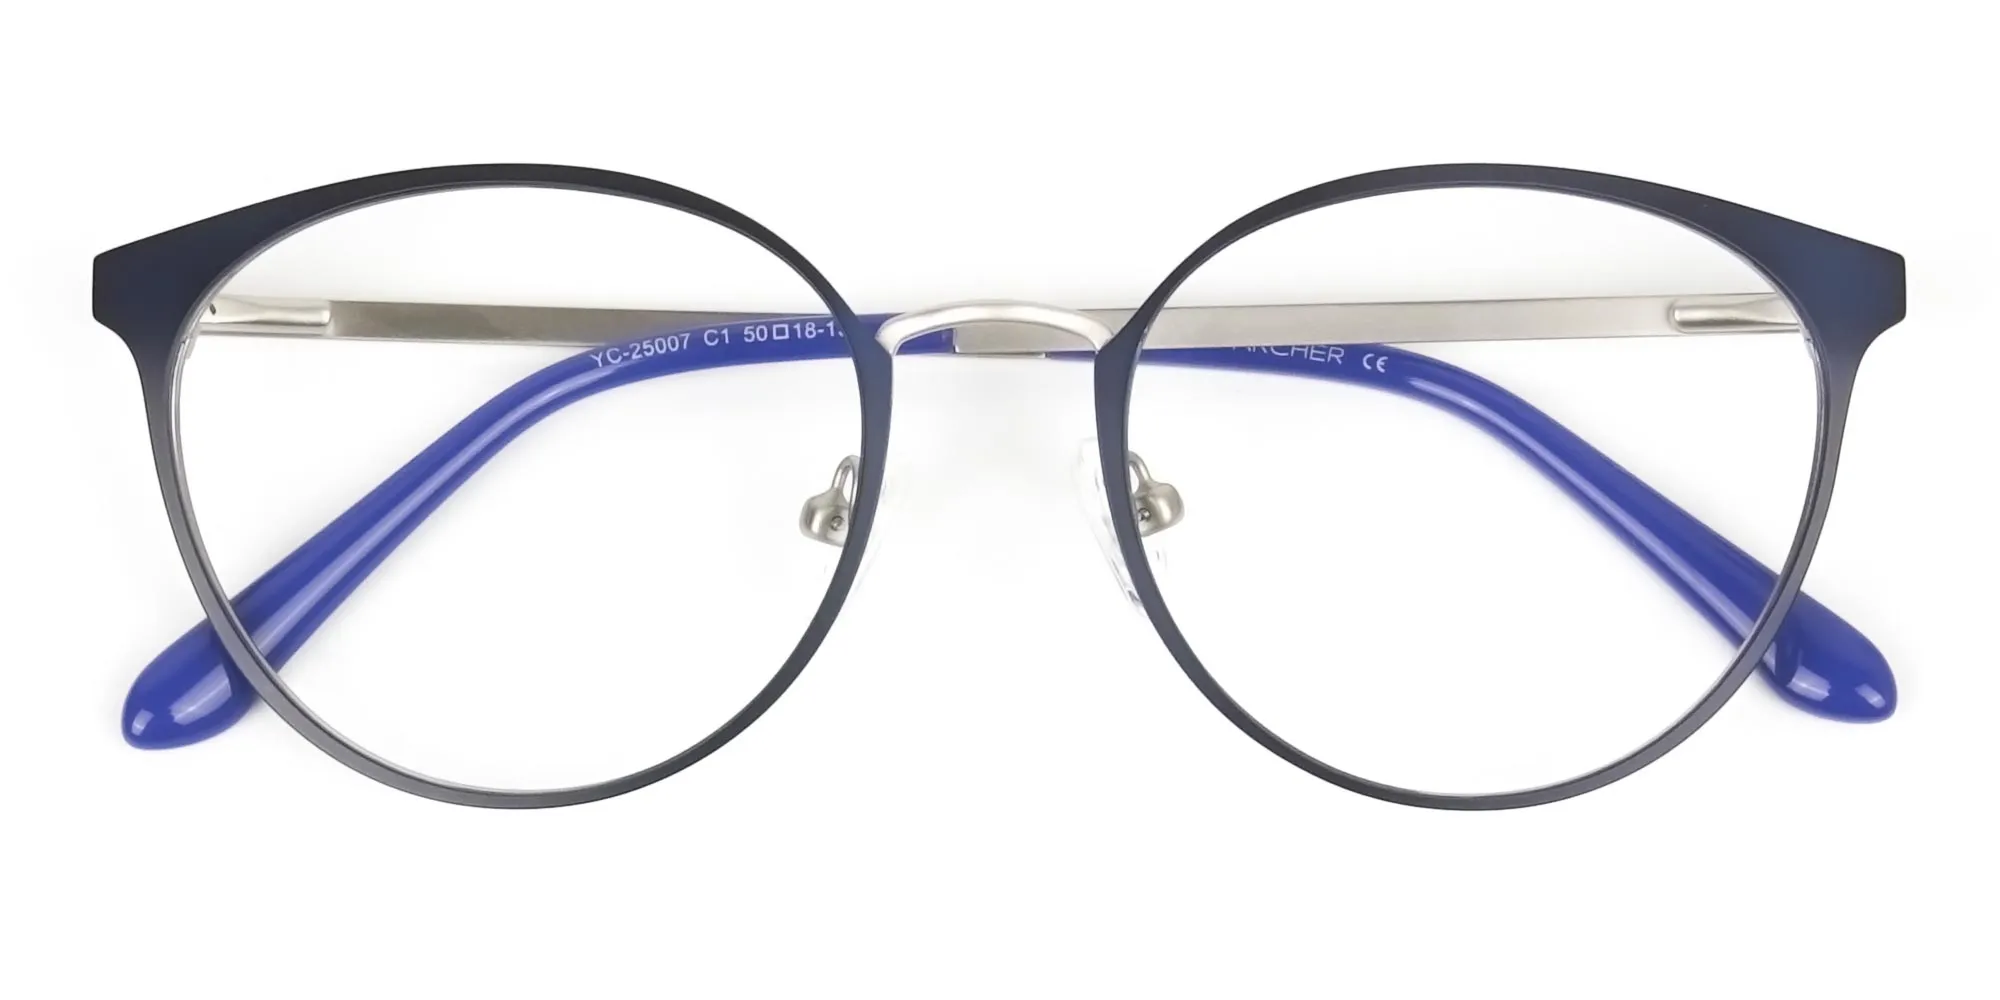 Navy Blue and Silver Round Glasses Frames Men Women  - 2